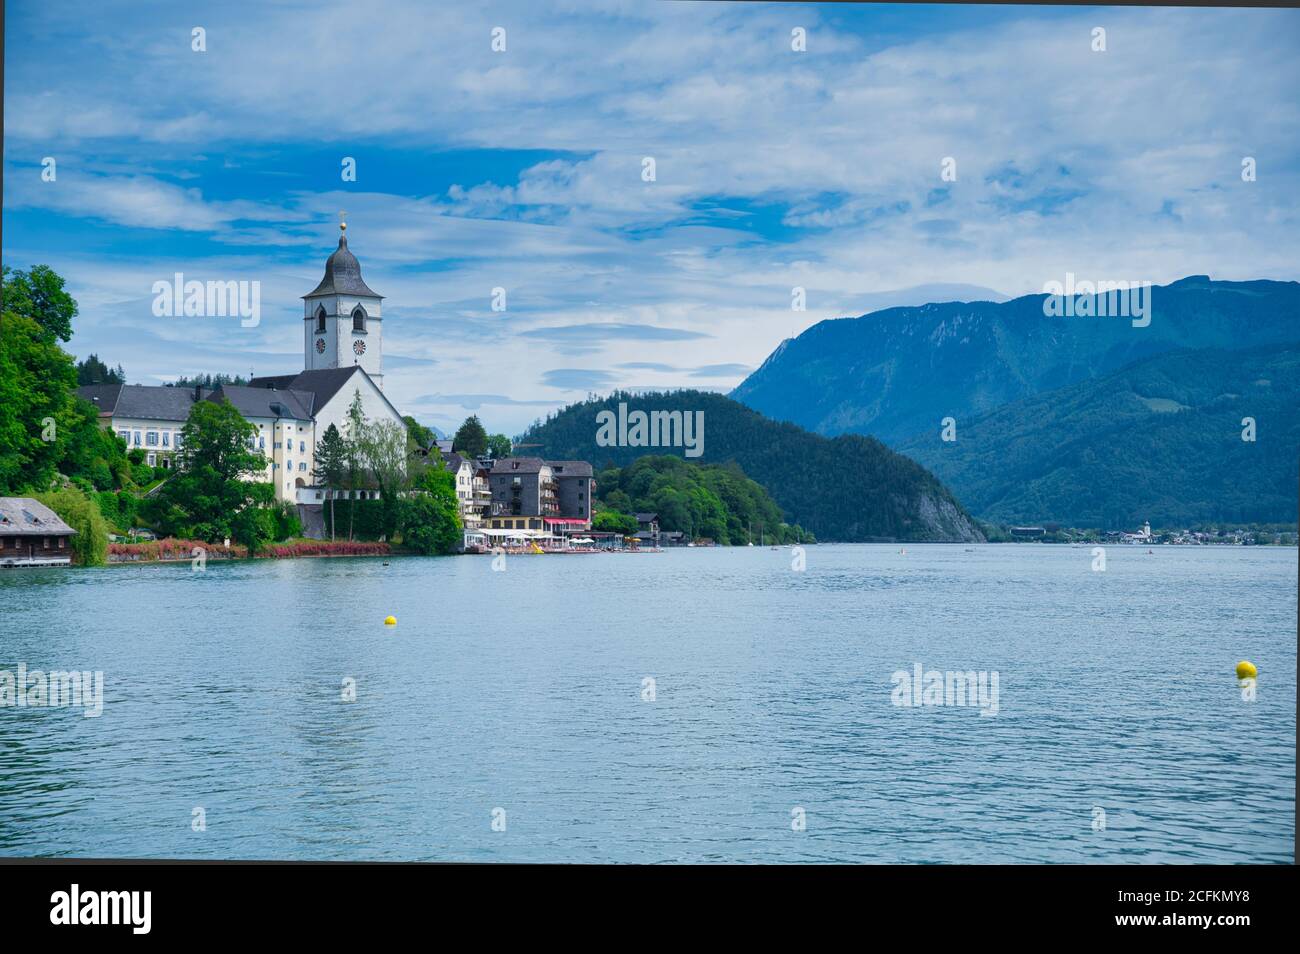 St. Wolfgang, Austria - July 09,2020: the church of the famous village St. Wolfgang in Austria, view over the lake Wolfgang Stock Photo